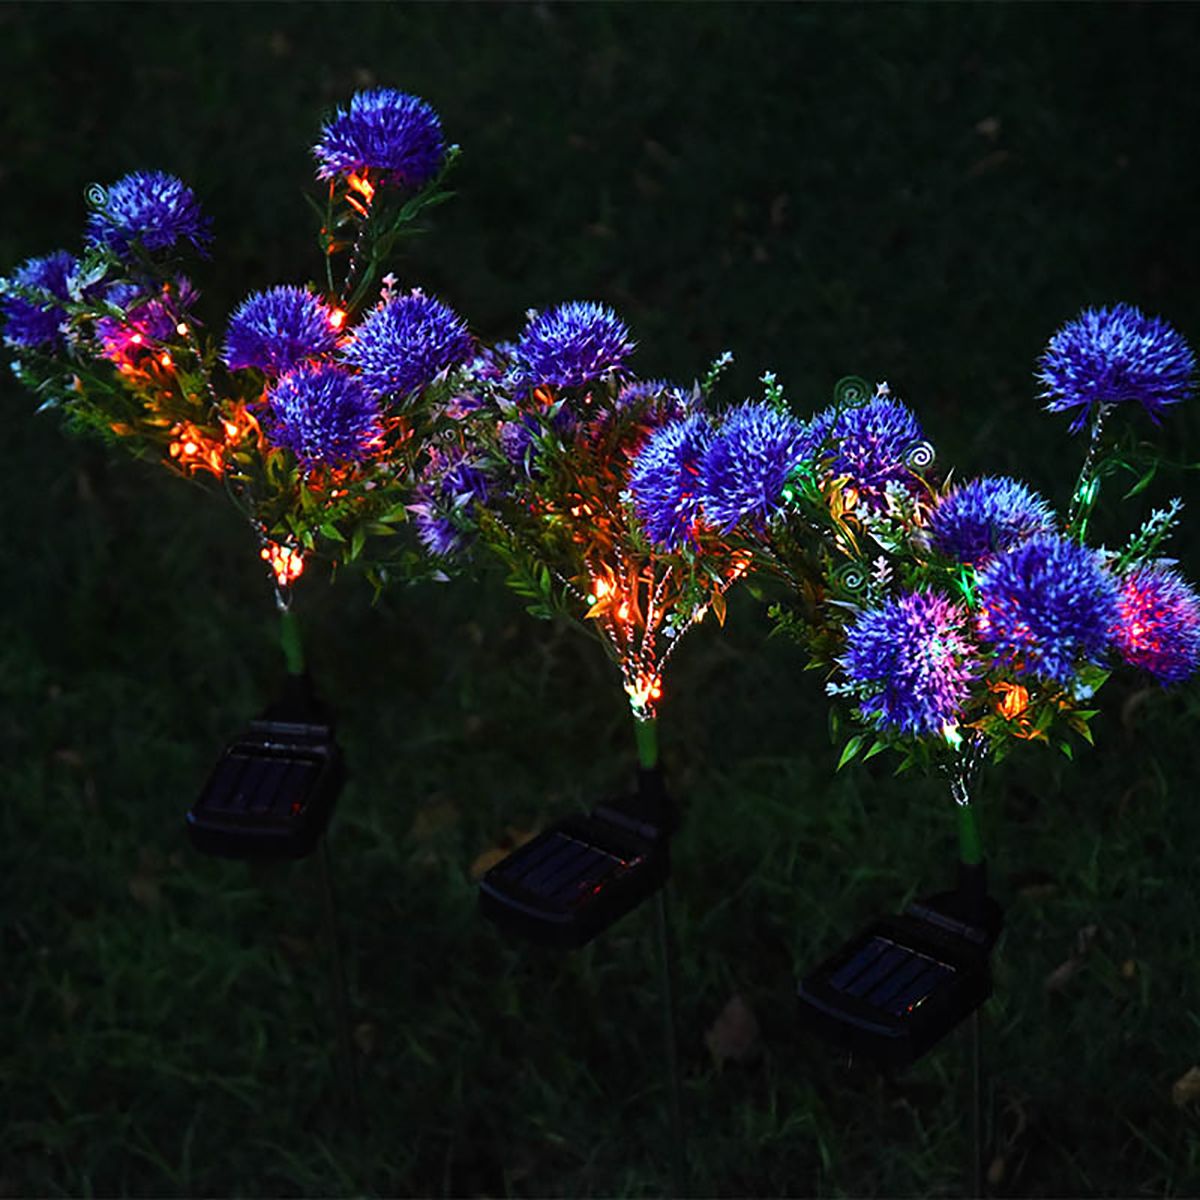 LED-Solar-Lawn-Lights-Solar-Flower-Lights-with-Multi-Color-Changing-for-Garden-Patio-Yard-Decoration-1703488